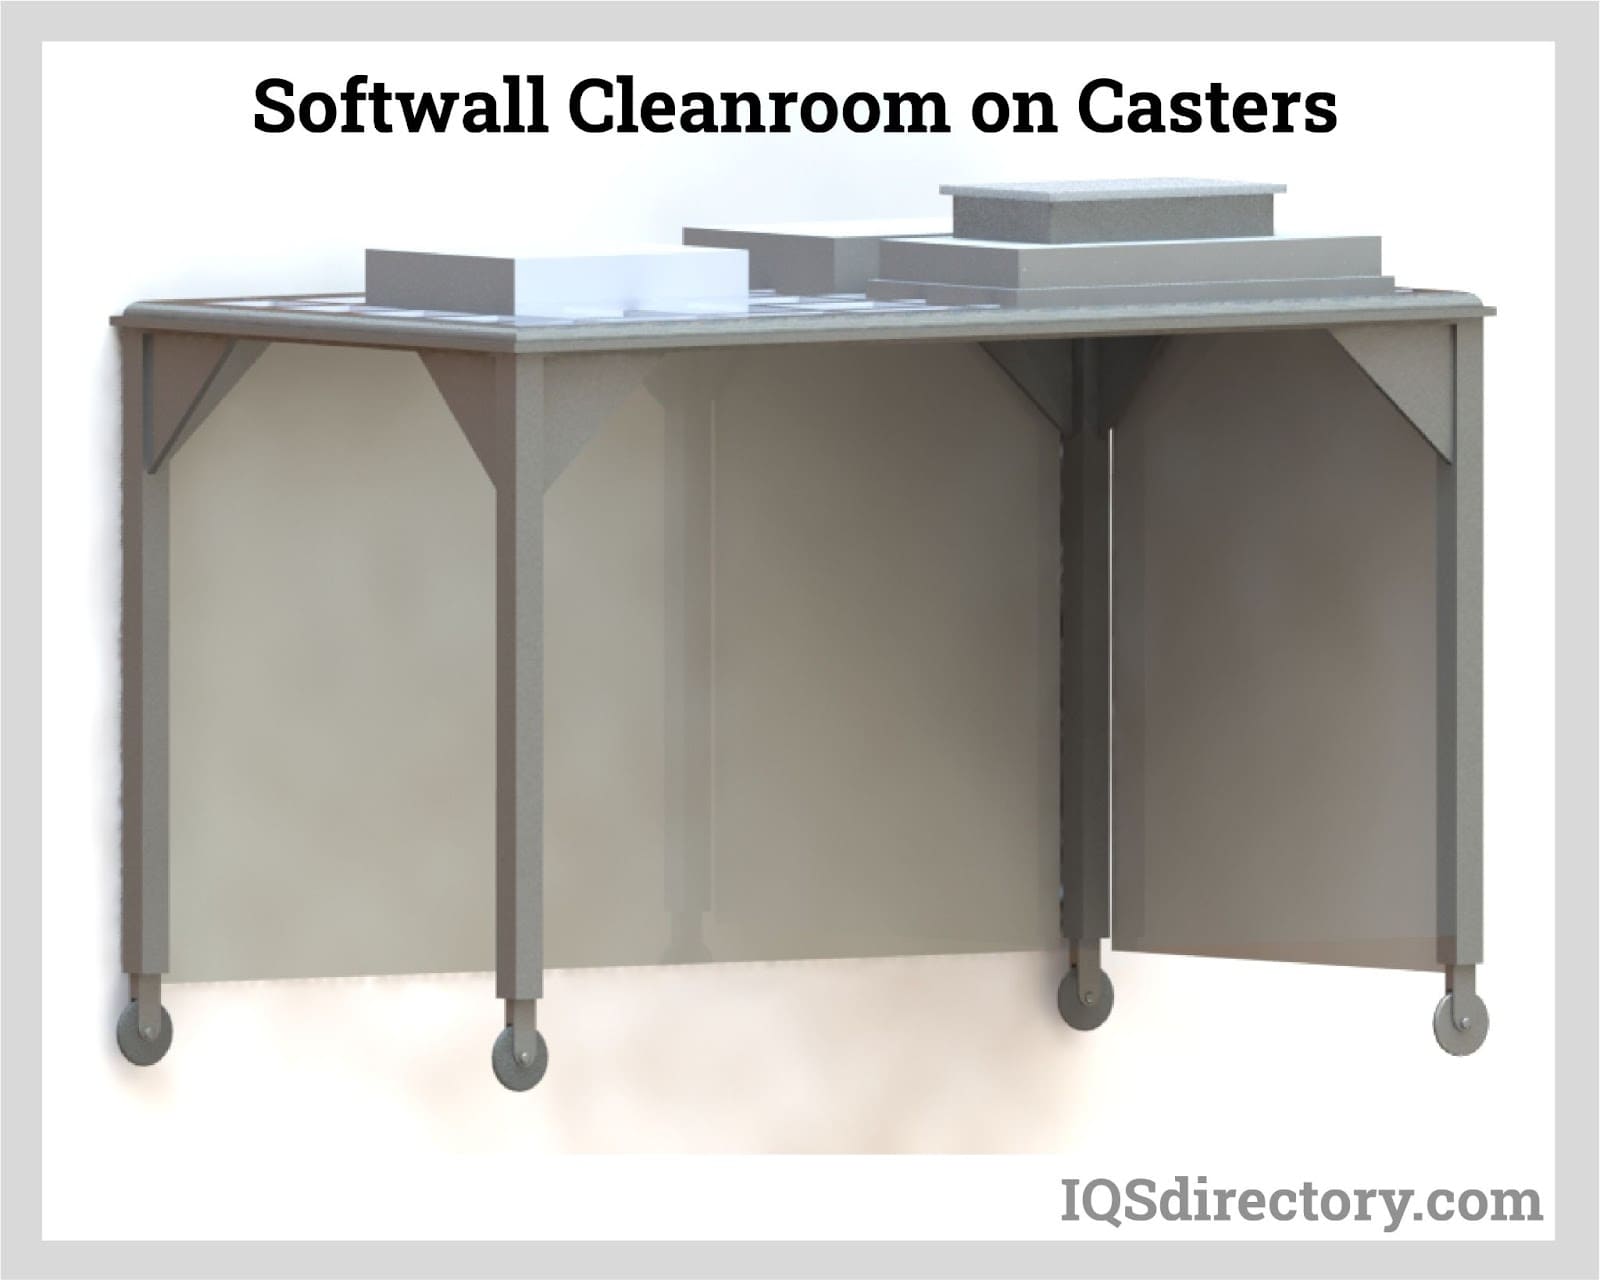 Softwall Cleanroom on Casters